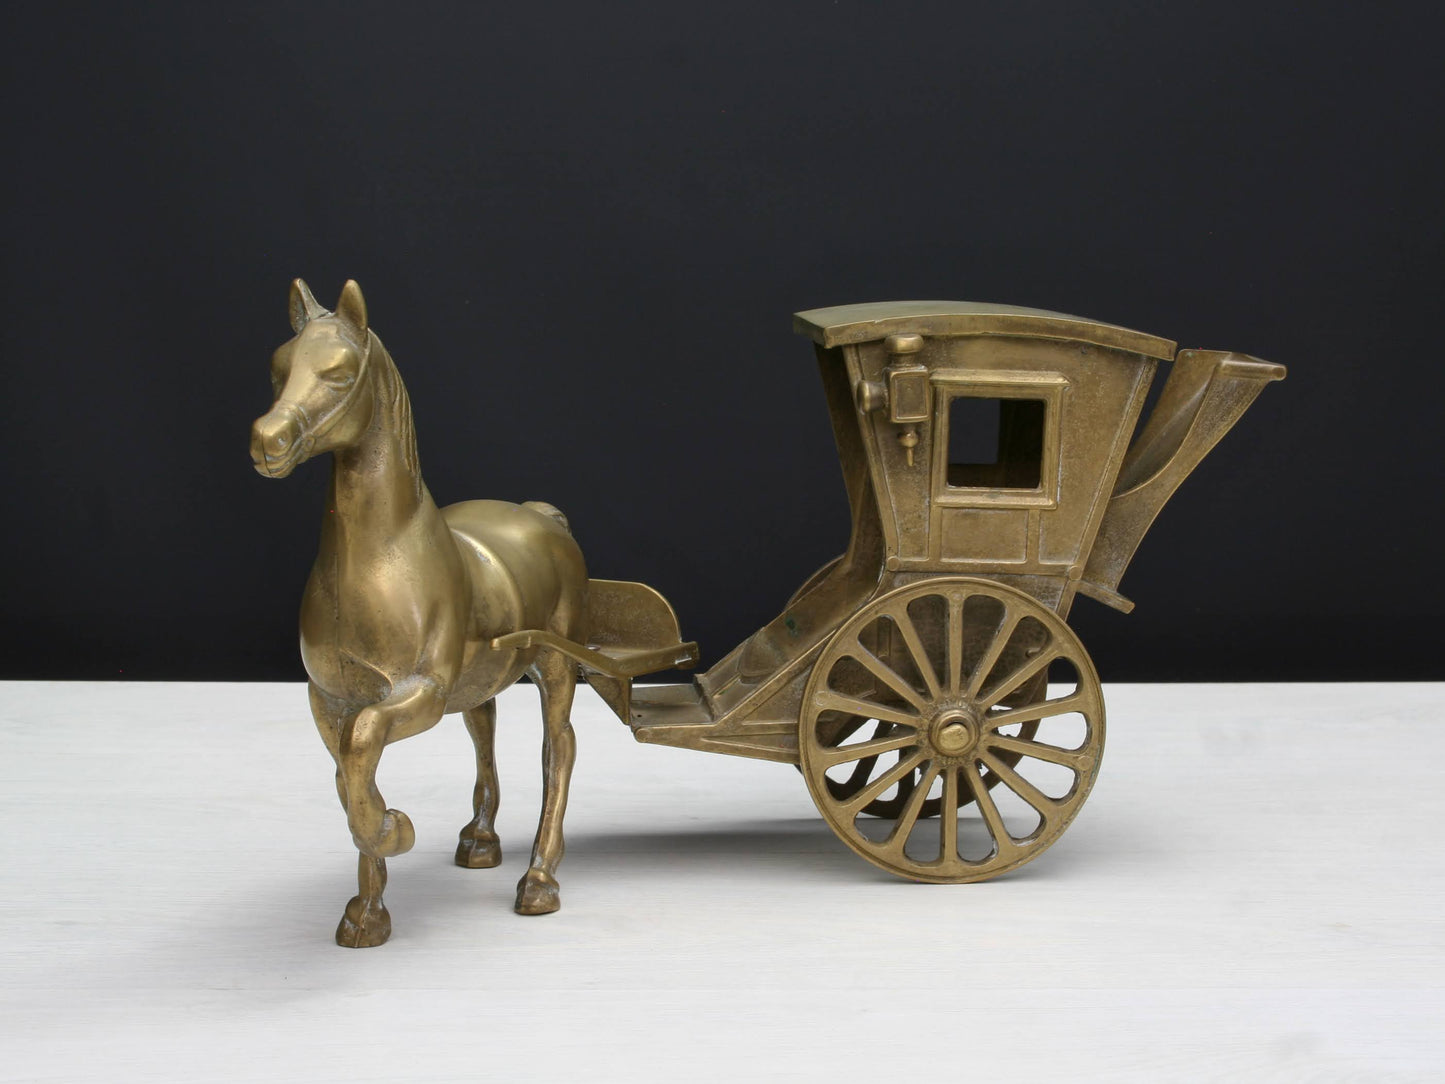 Horse and Carriage Brass Figurine